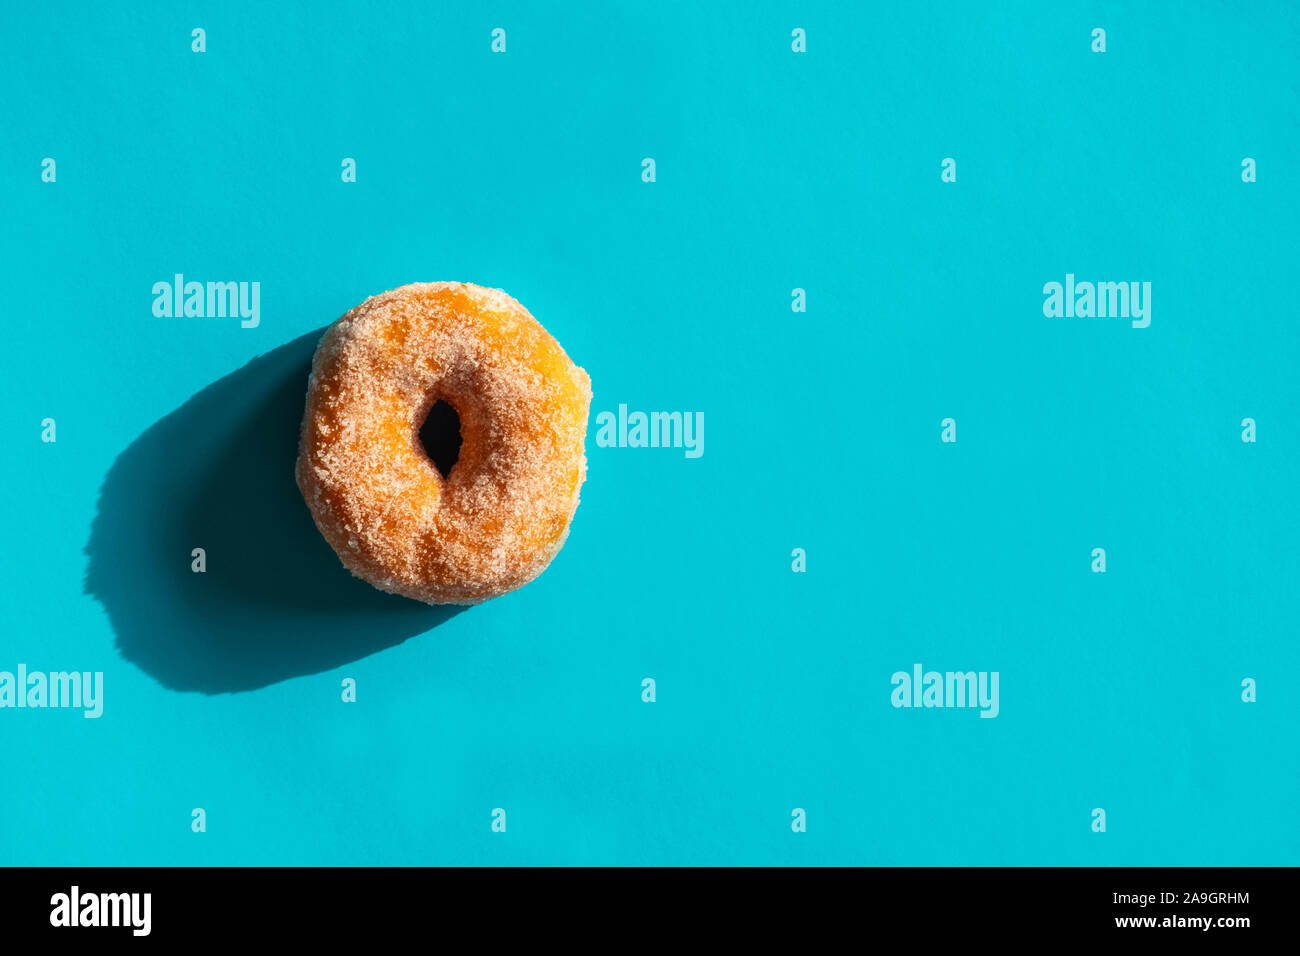 Classic fried sugared donut on bright blue background Stock Photo